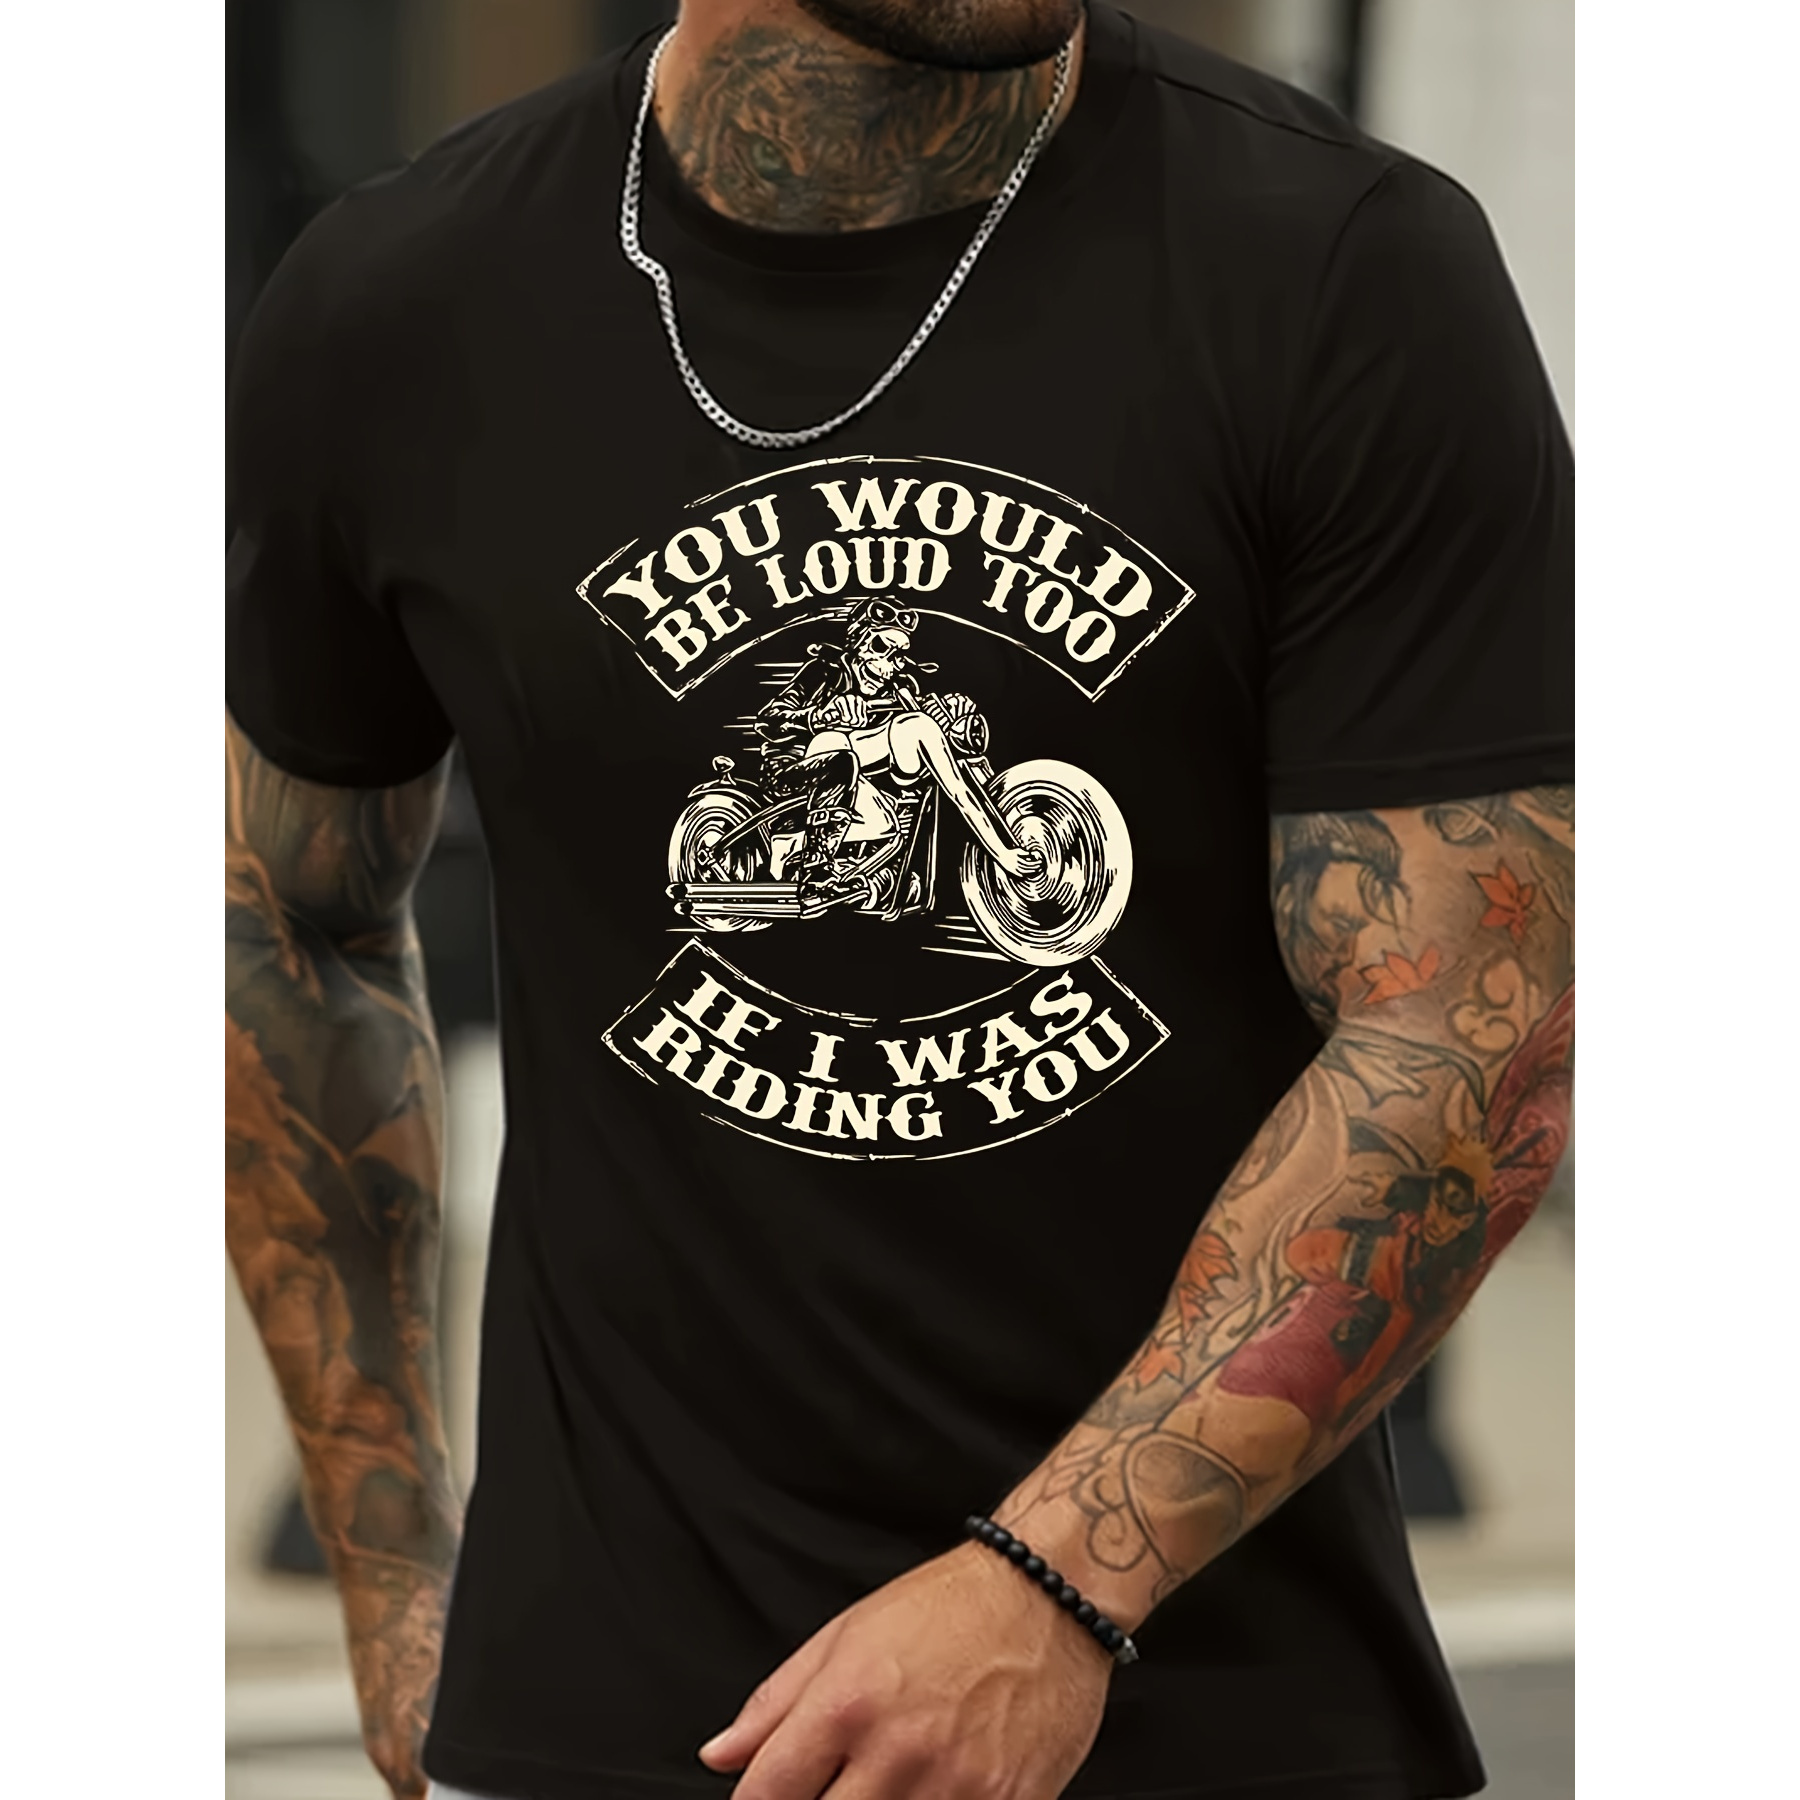 

Motorcycle Printed Men's Fashion Short Sleeve T-shirt, Comfort And Casual Breathable Top, Suitable For Men's Fitness Training, Jogging, Outdoor Activities